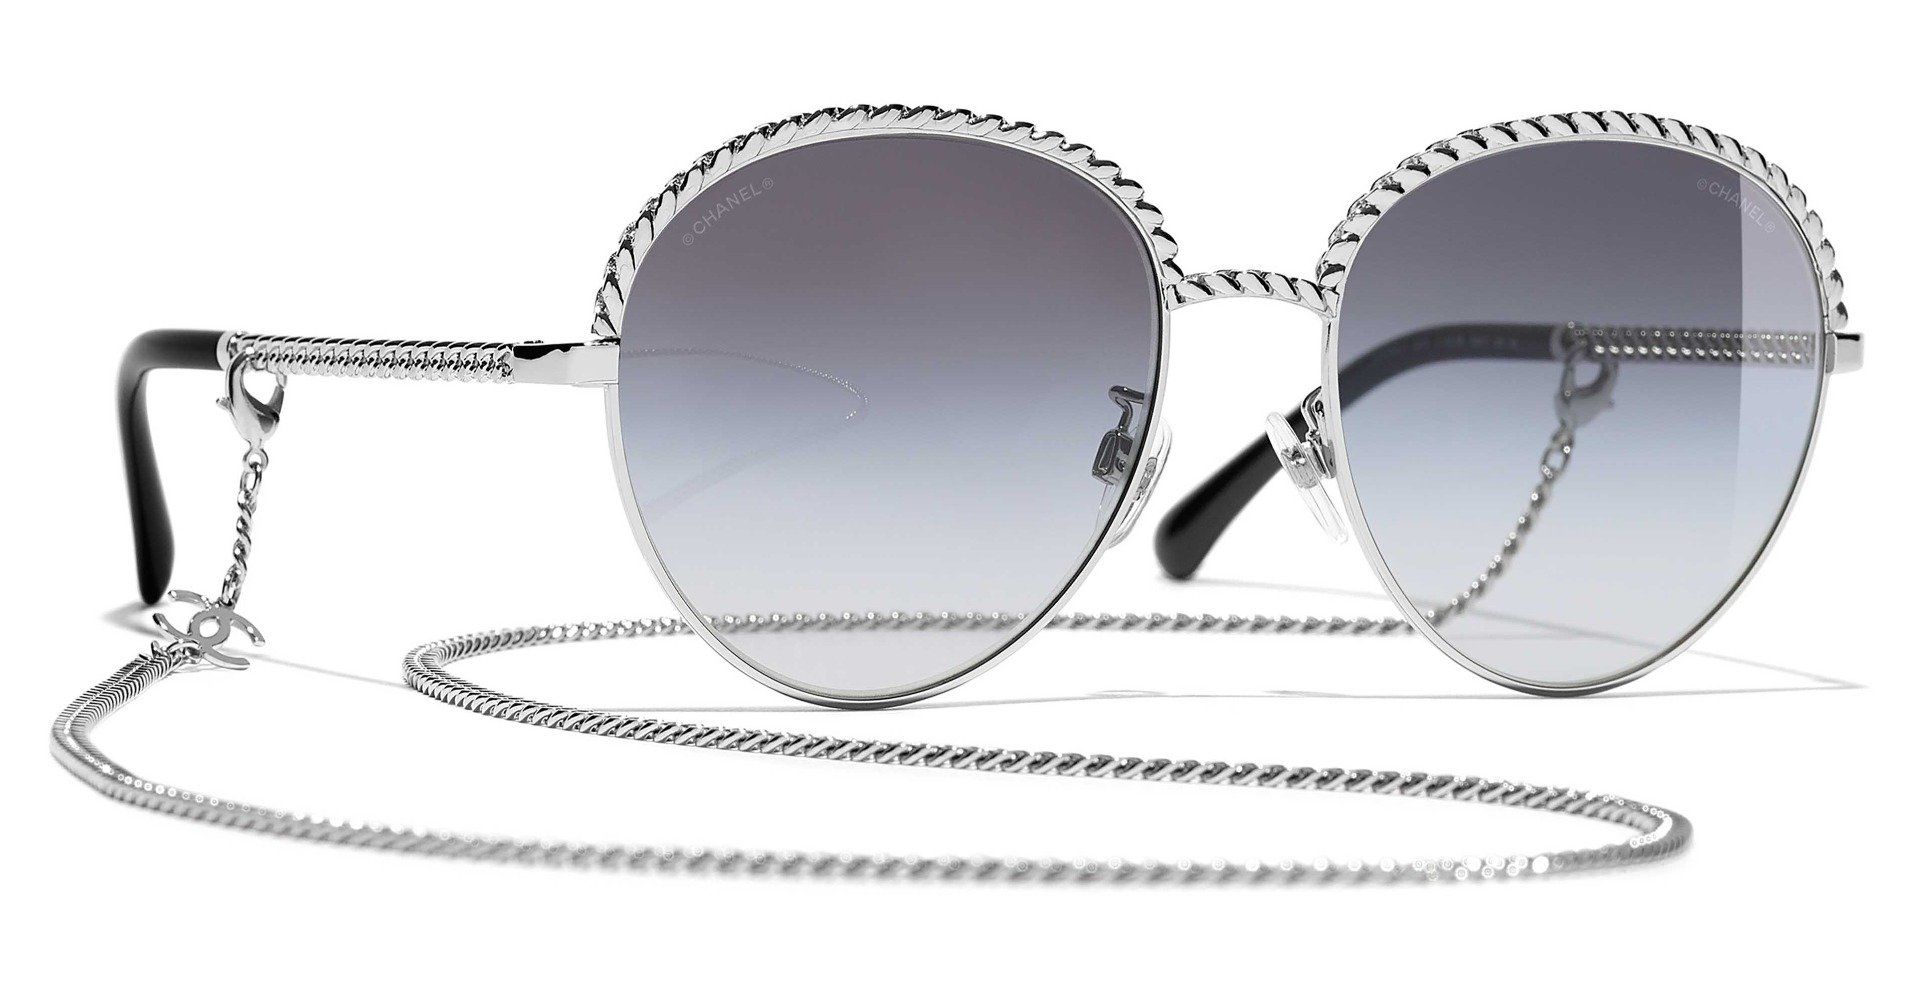 chanel glasses with chain